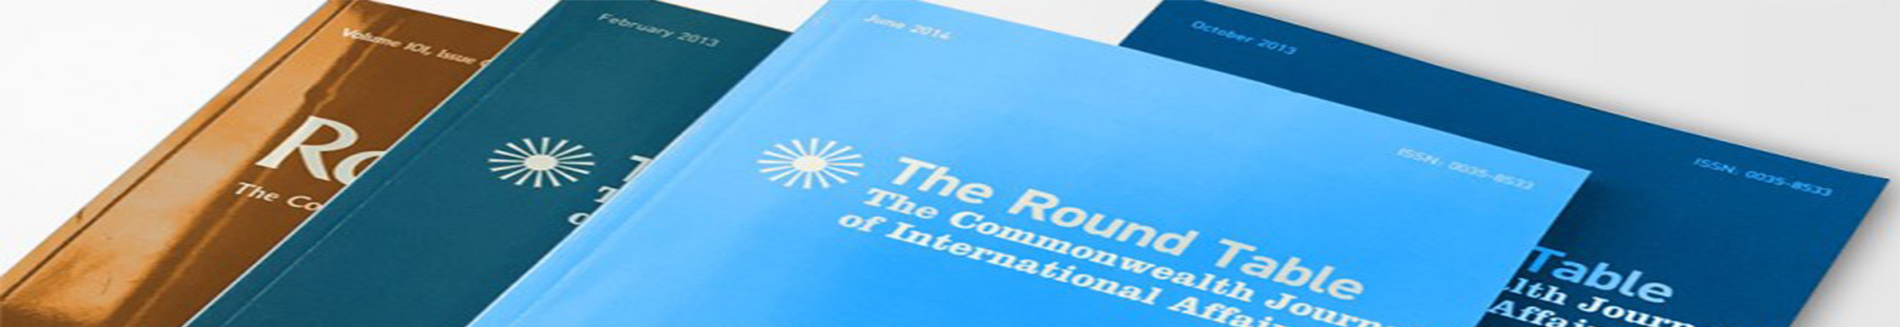 editions of the Commonwealth Round Table Journal